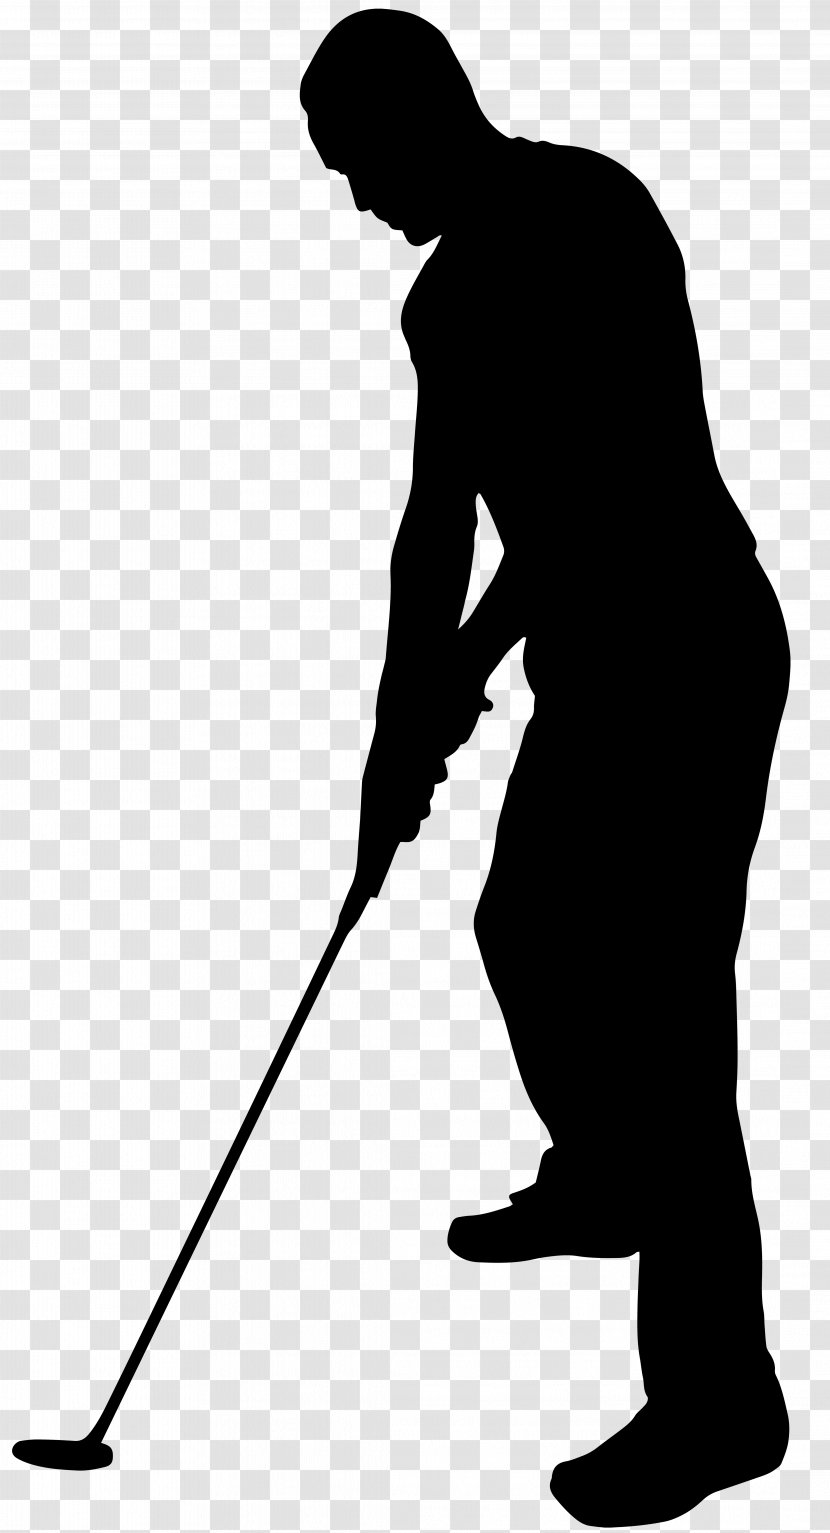 Image File Formats Lossless Compression - Volleyball - Golf Player Silhouette Clip Art Transparent PNG